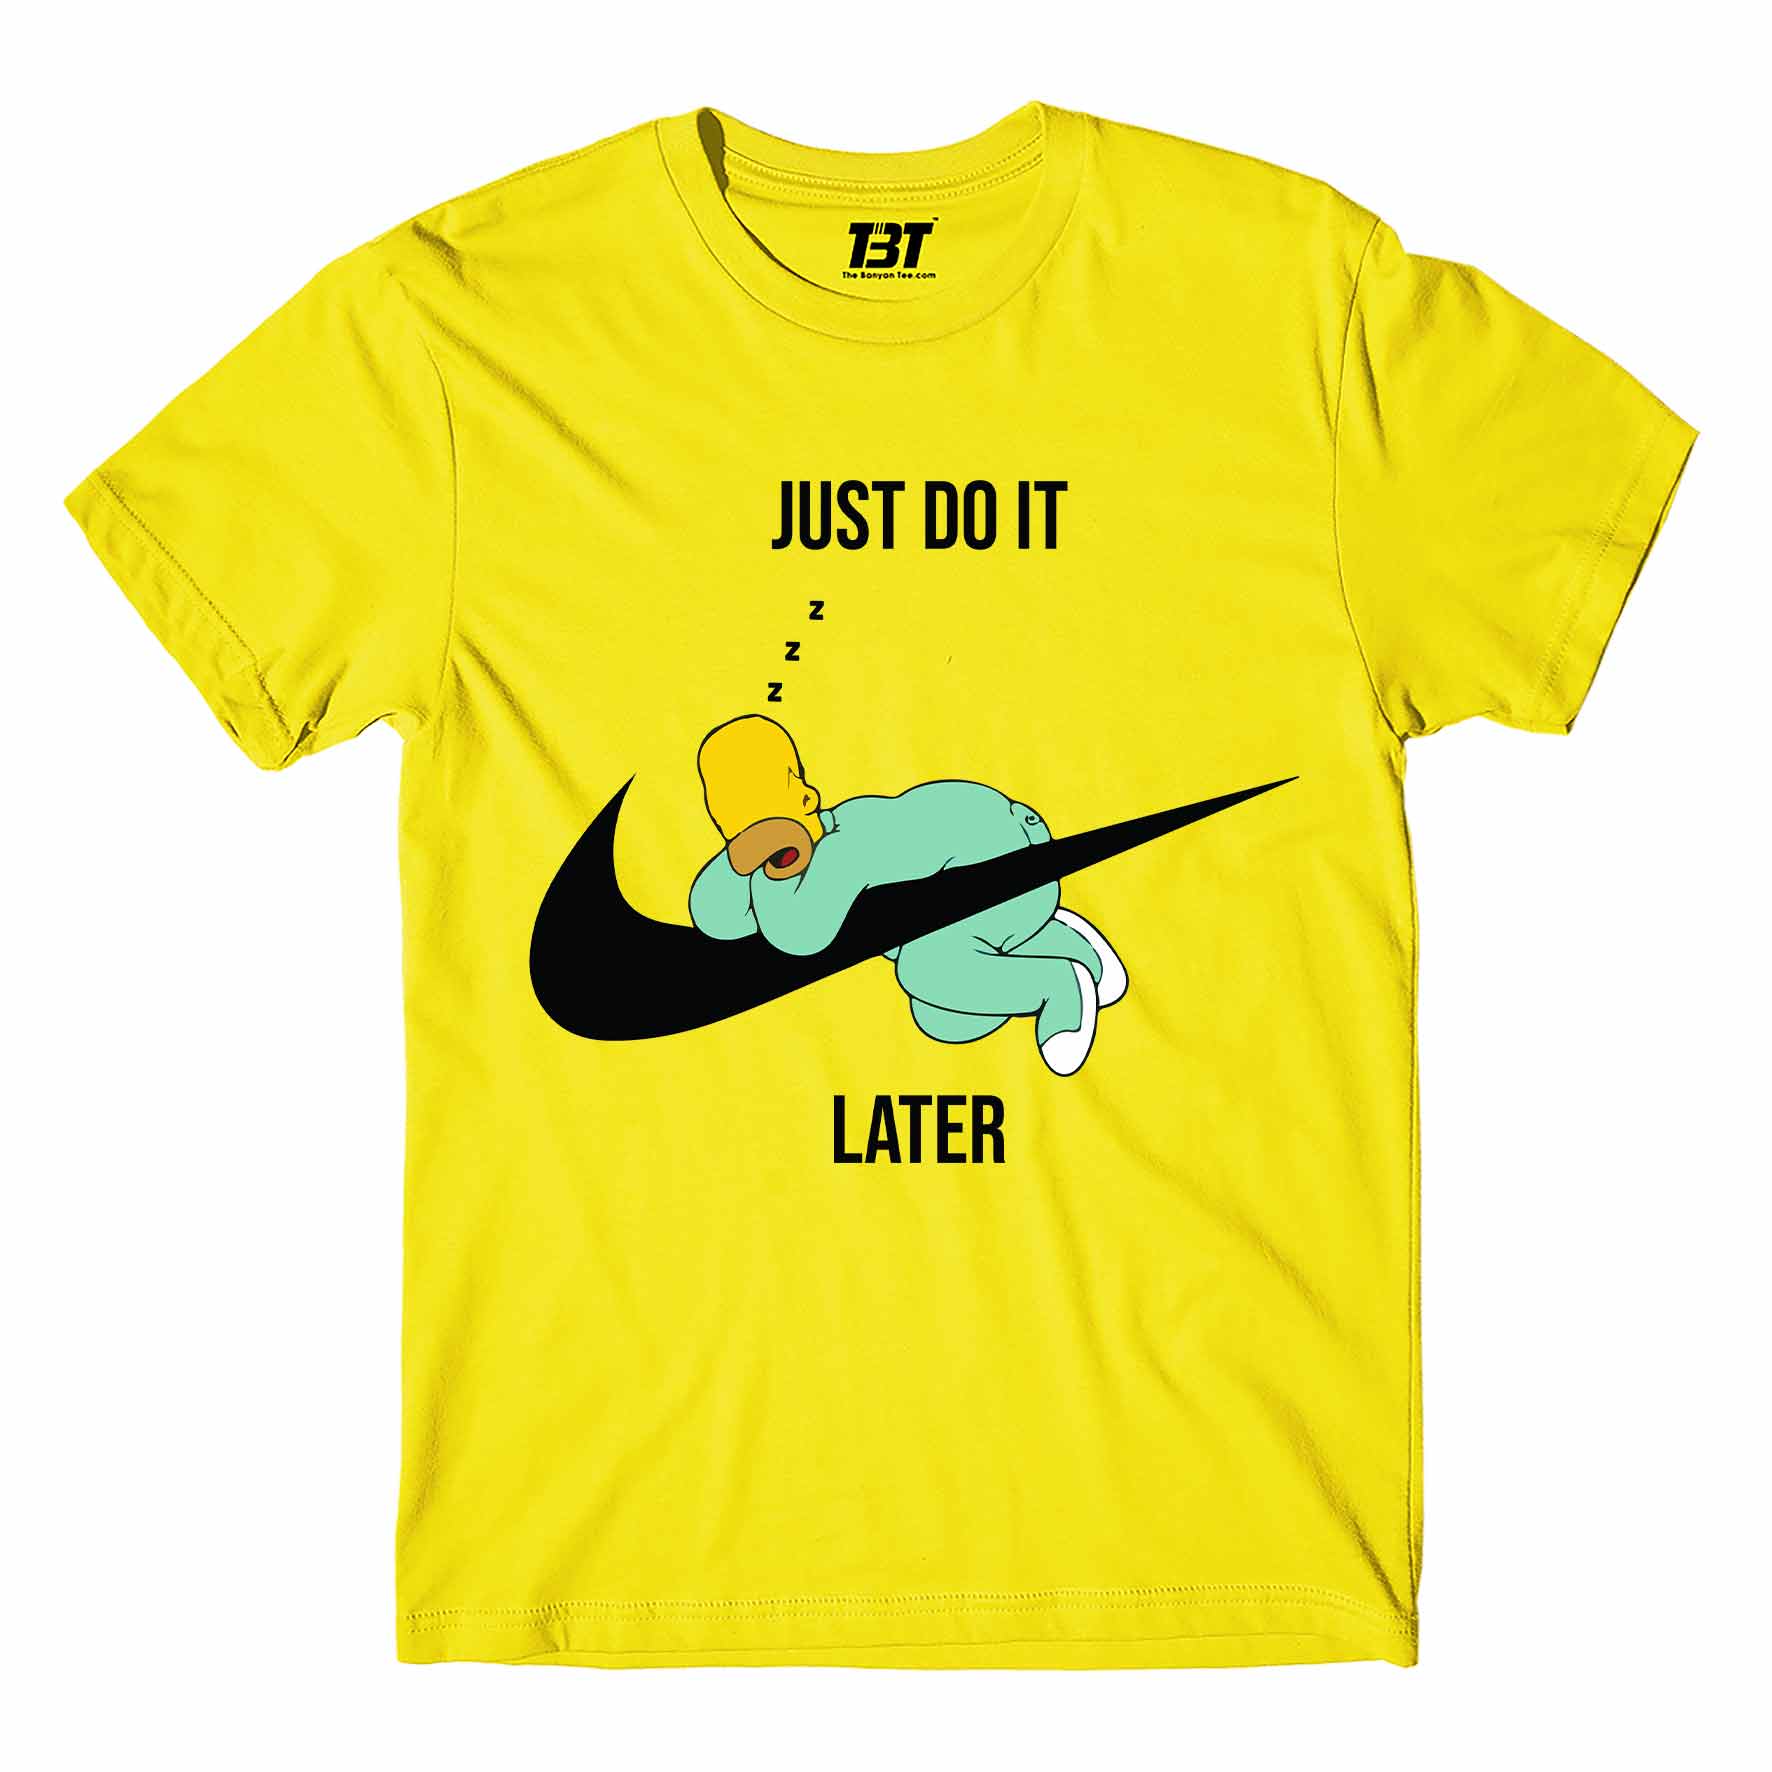 the simpsons just do it later t-shirt tv & movies buy online united states usa the banyan tee tbt men women girls boys unisex yellow - homer simpson